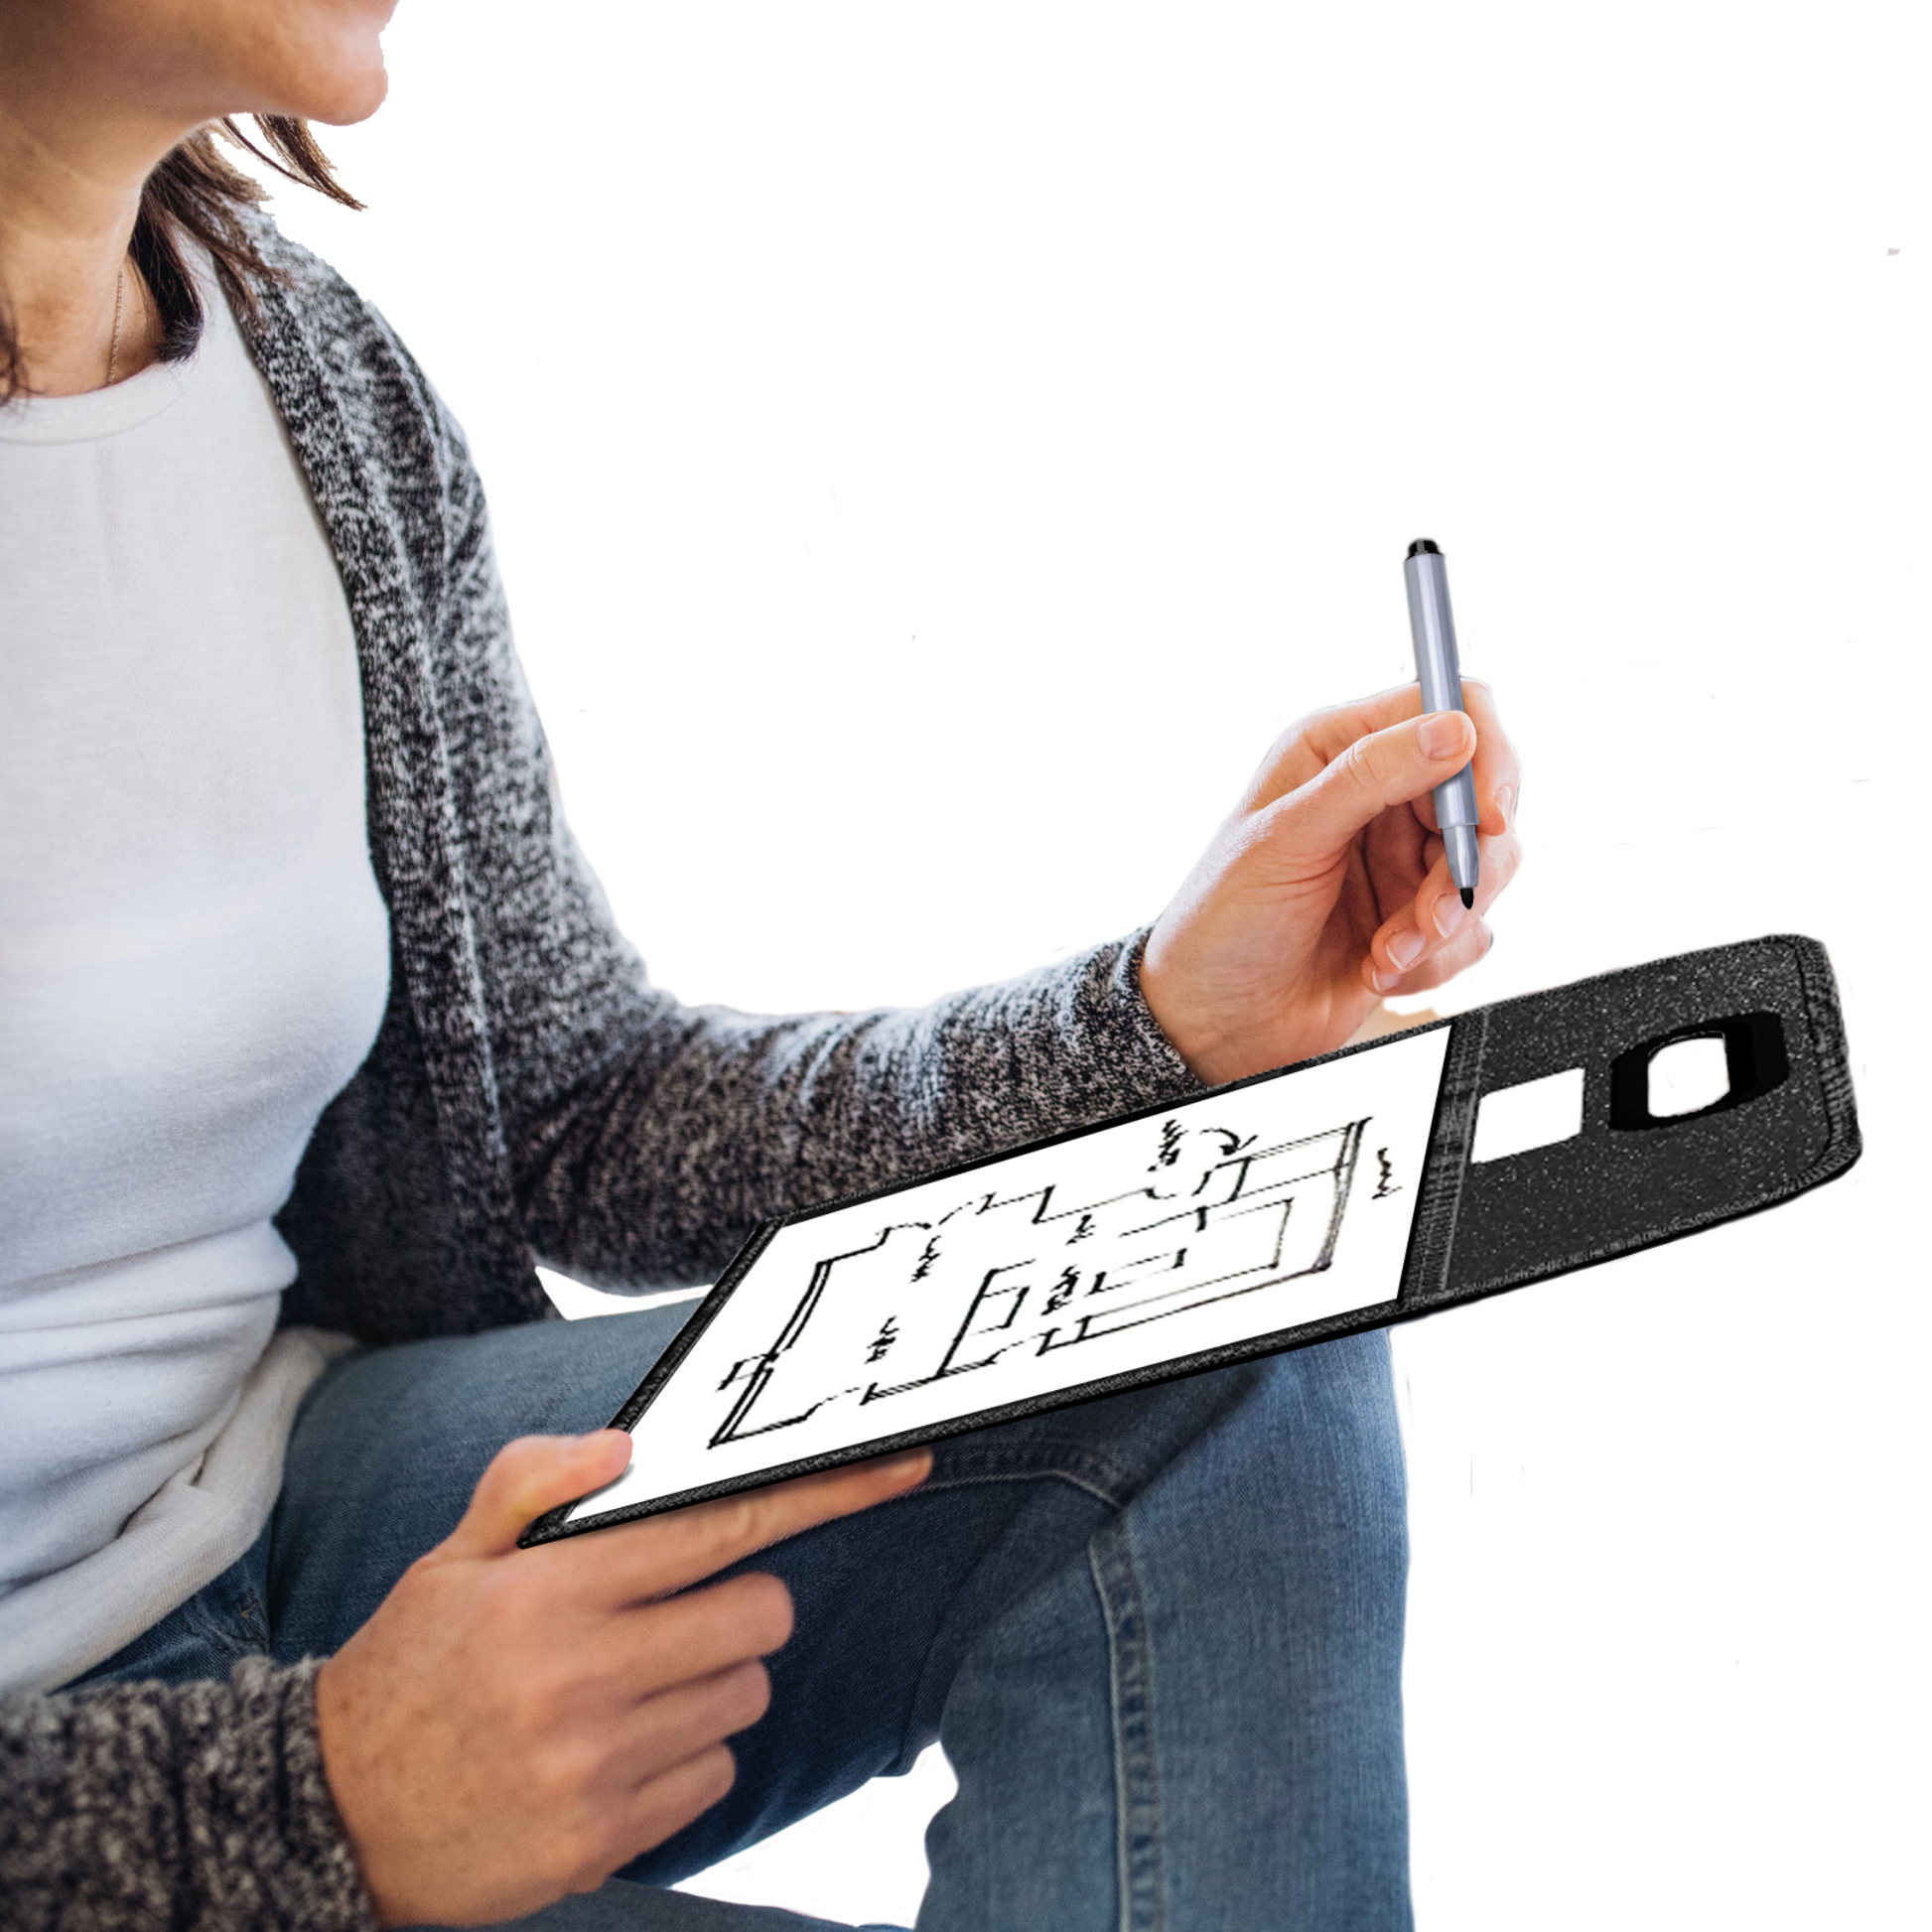 Person sitting cross-legged, holding a dry-erase pad with handle and writing with a marker. The pad shows a drawn flowchart, illustrating the use of the pad for organizing thoughts or planning.